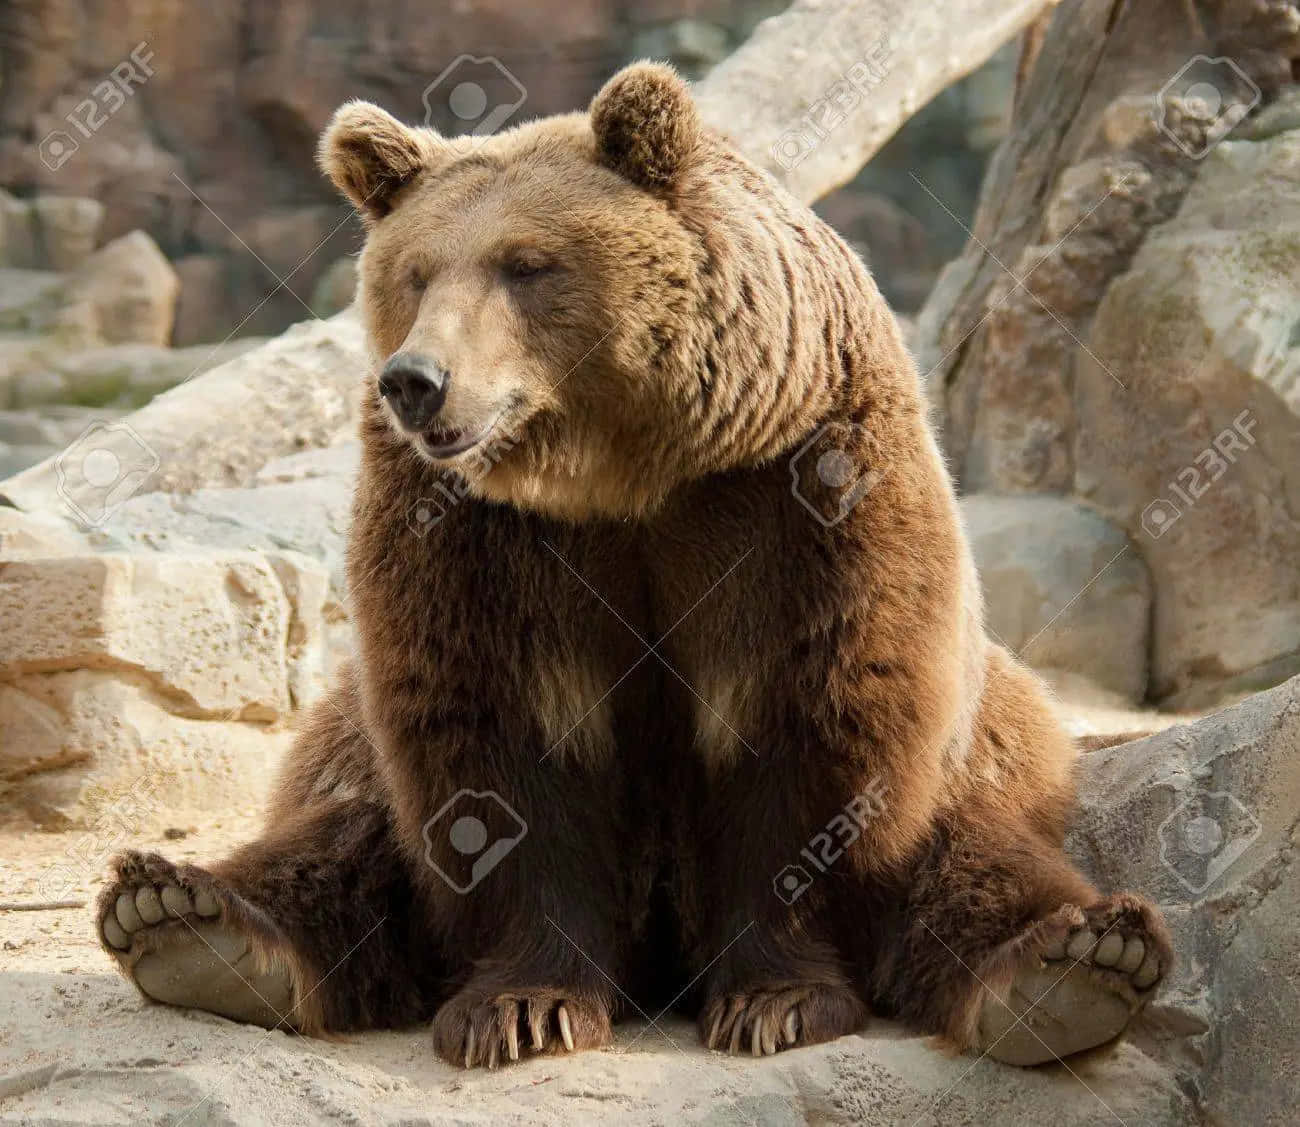 Funny Lazy Bear Picture